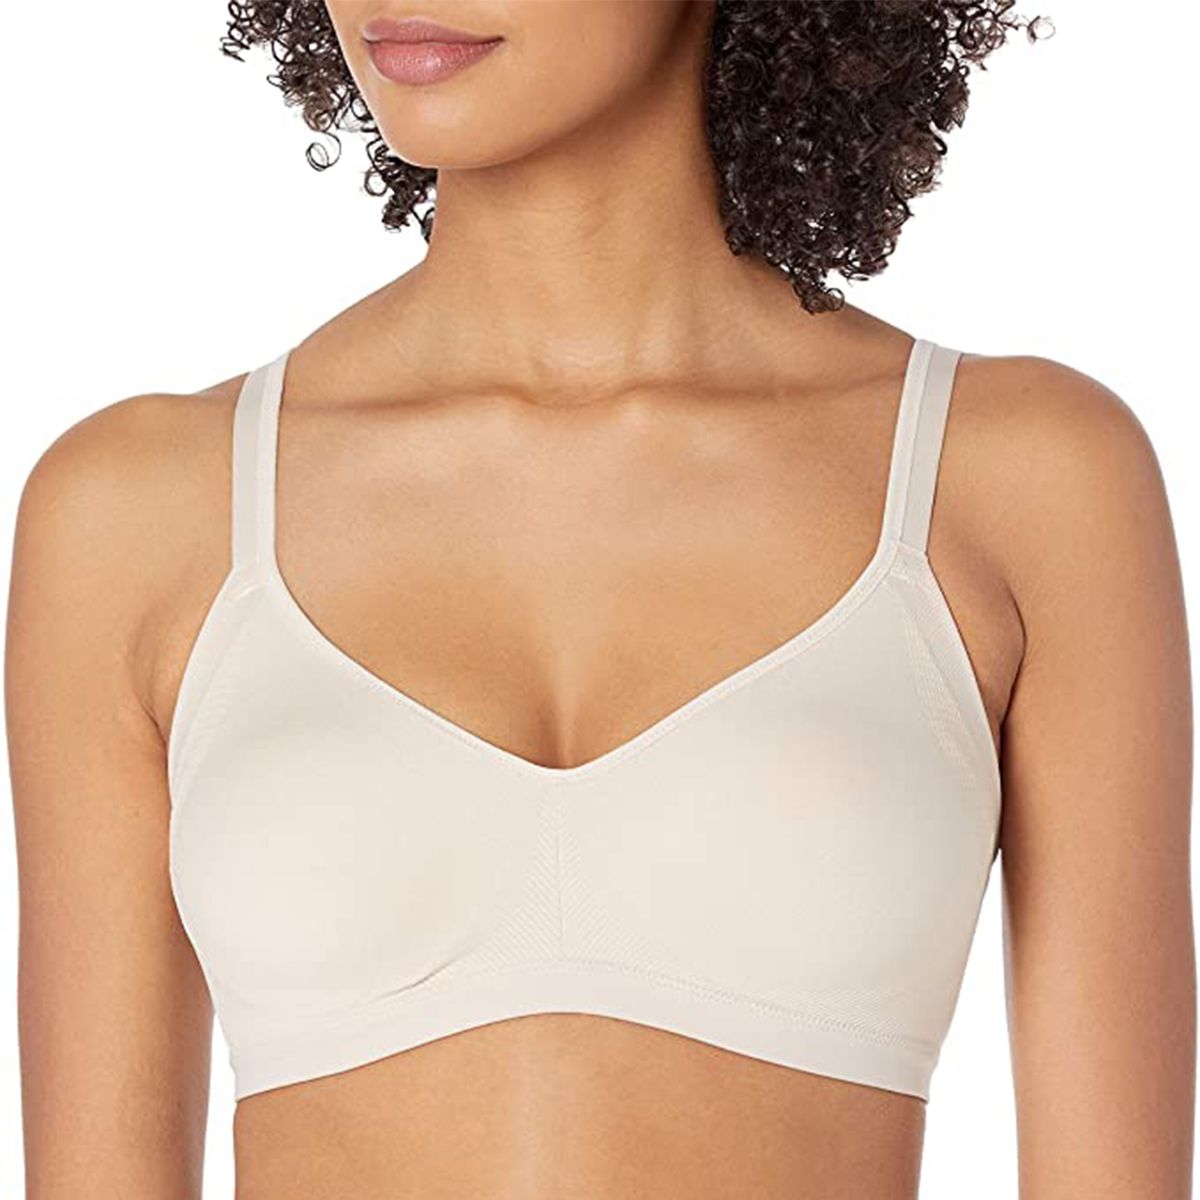 The 9 Best Post Mastectomy Bras For Breast Cancer Survivors